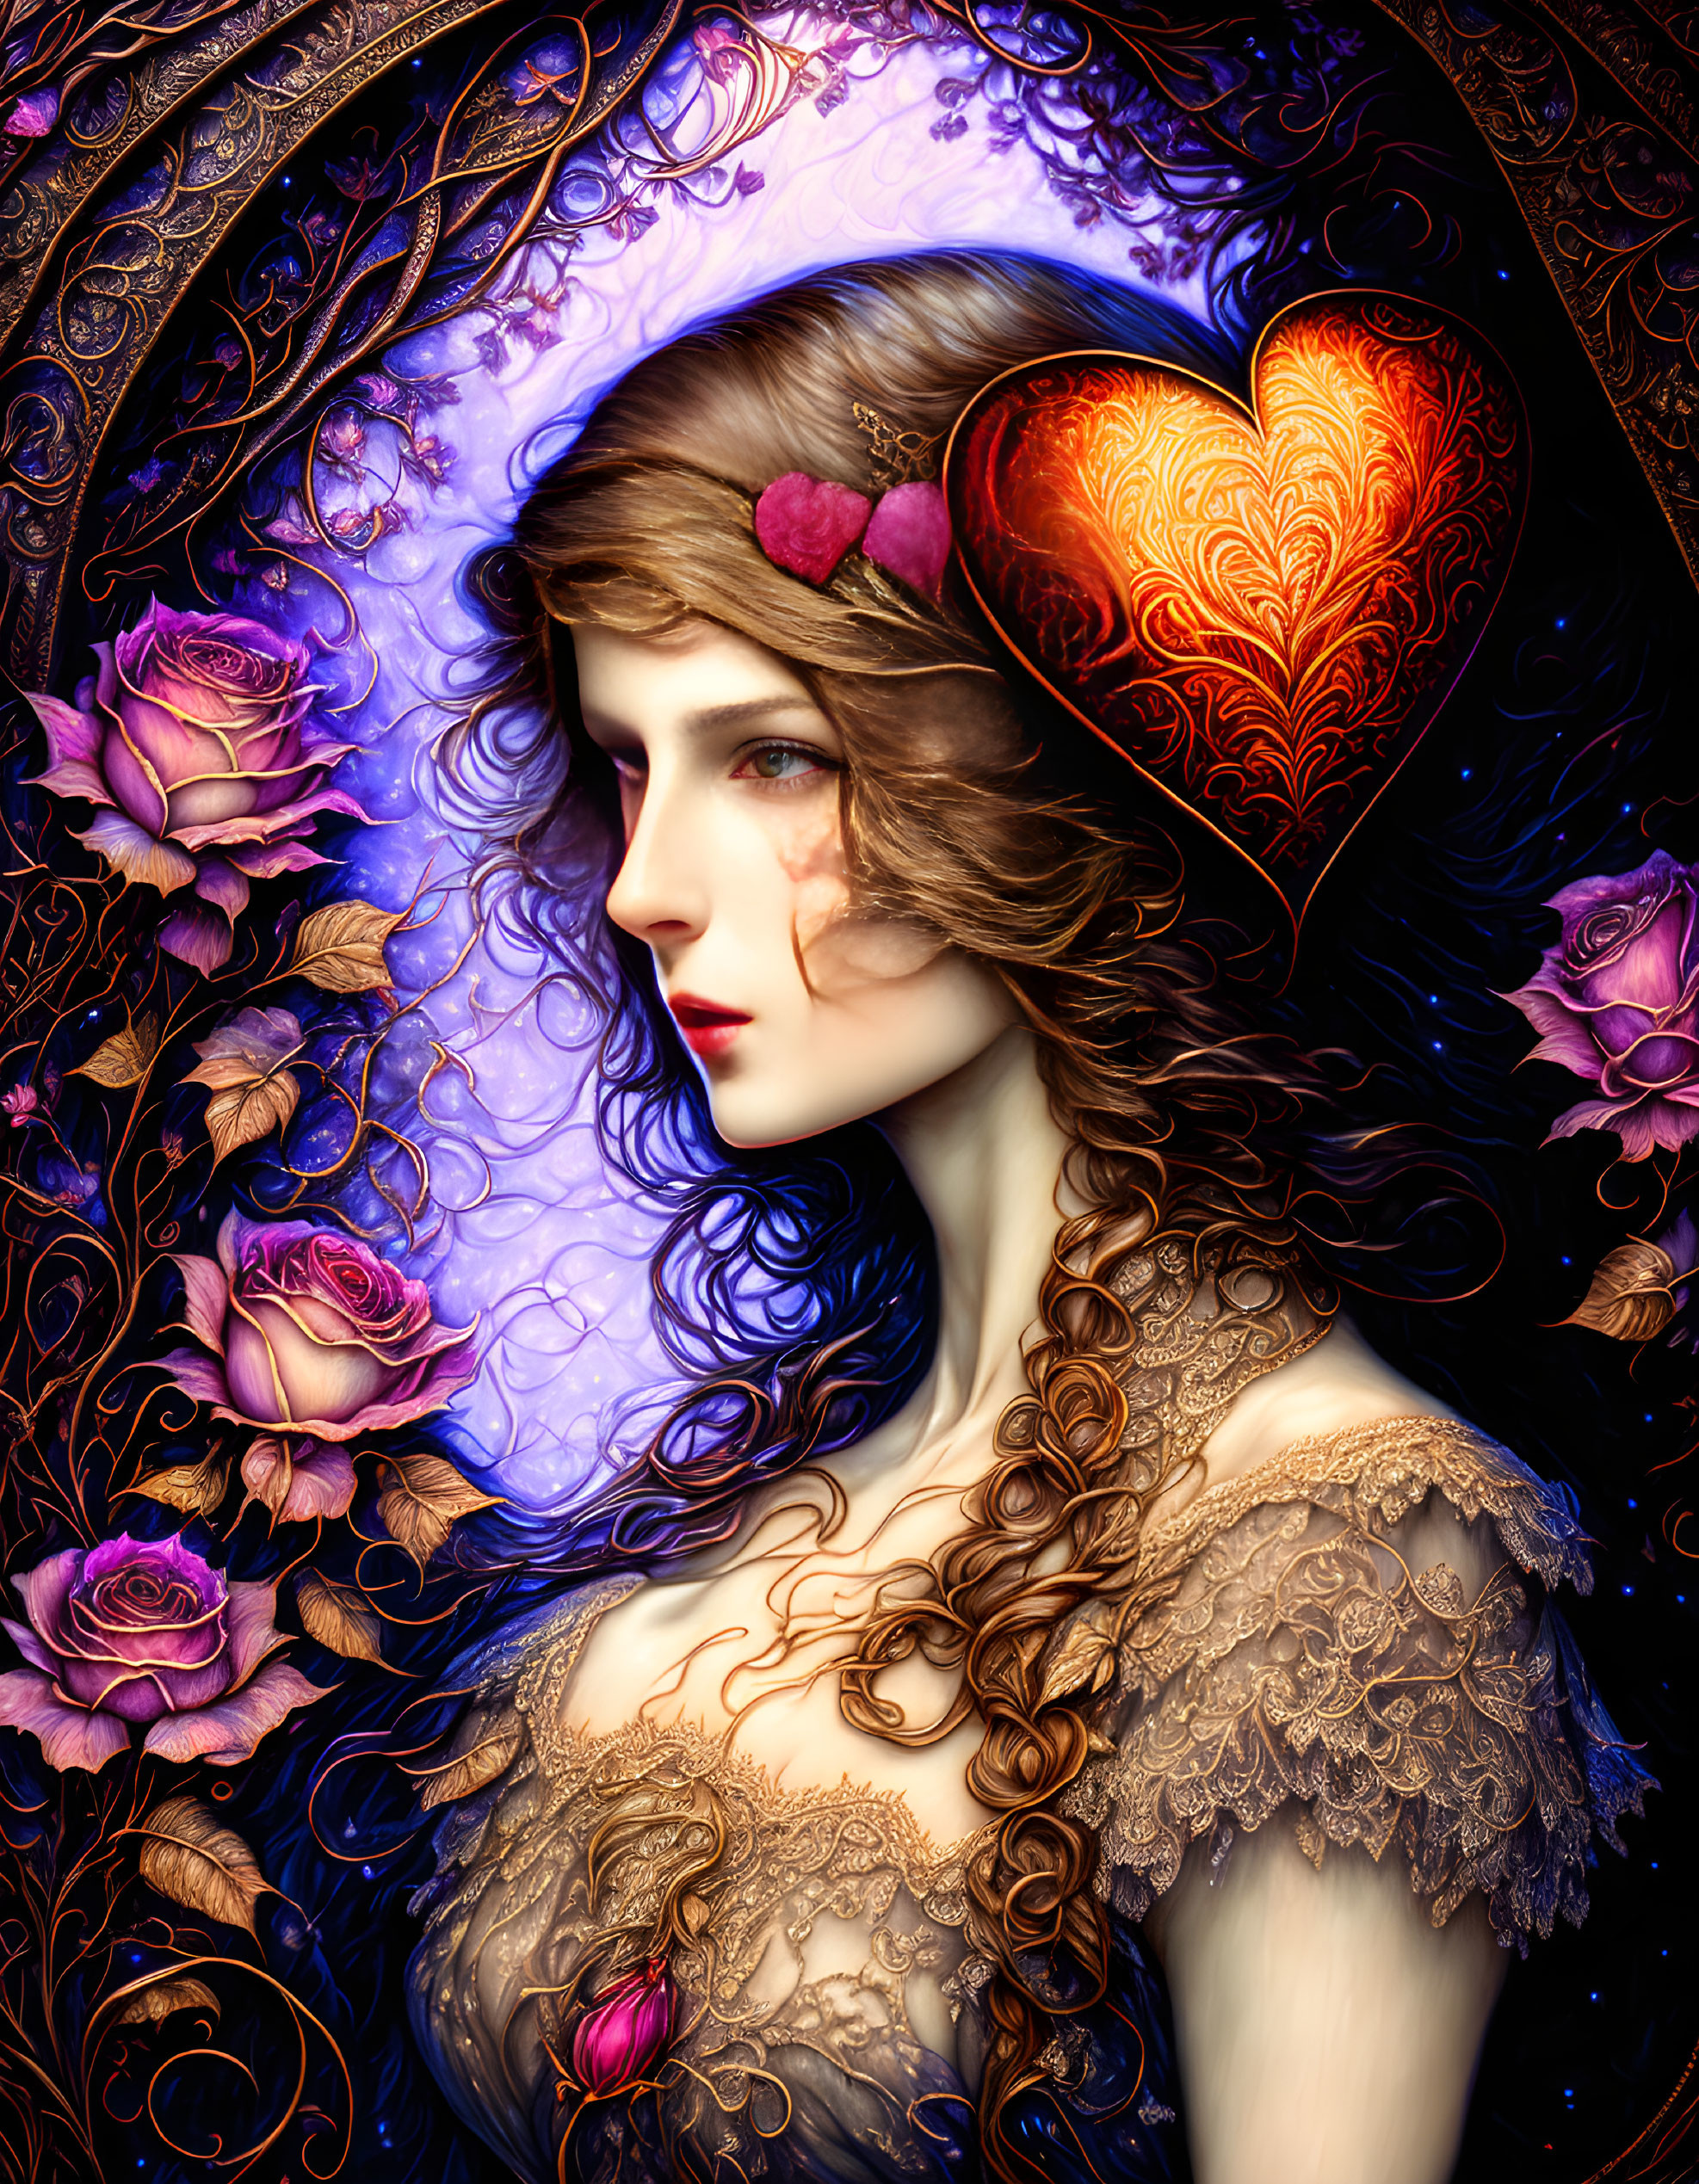 Illustration of woman with flowing hair in purple hues, roses, and red heart halo